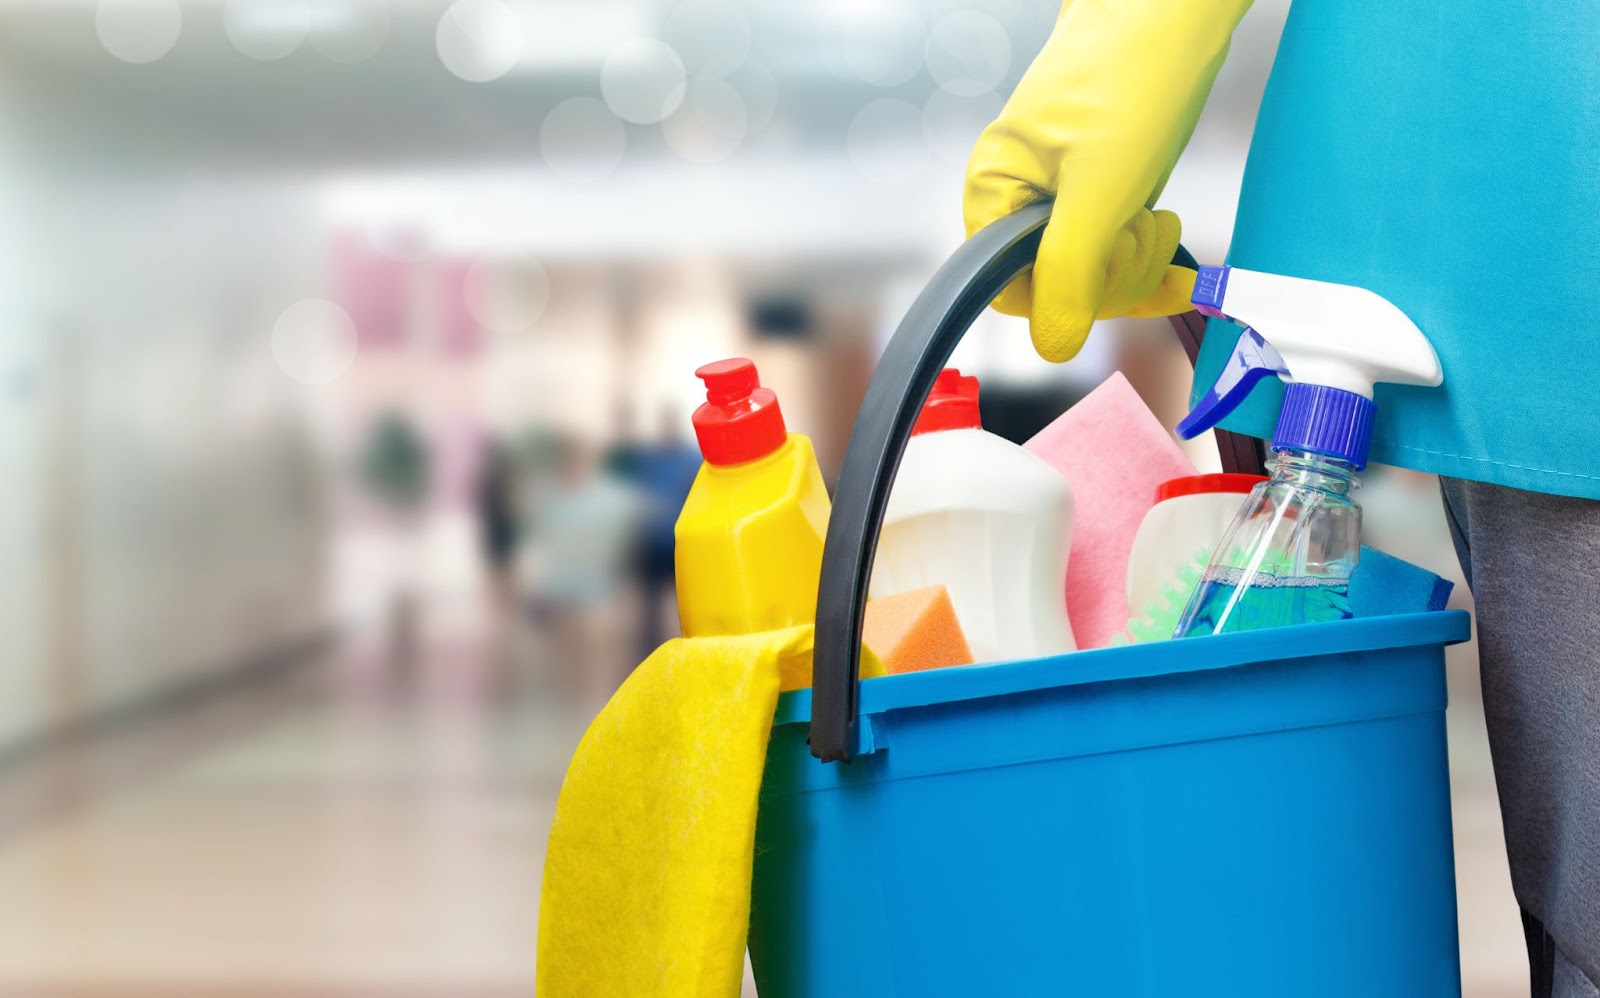 A business person stands with a bucket and cleaning products on blurred background after starting a new cleaning business.